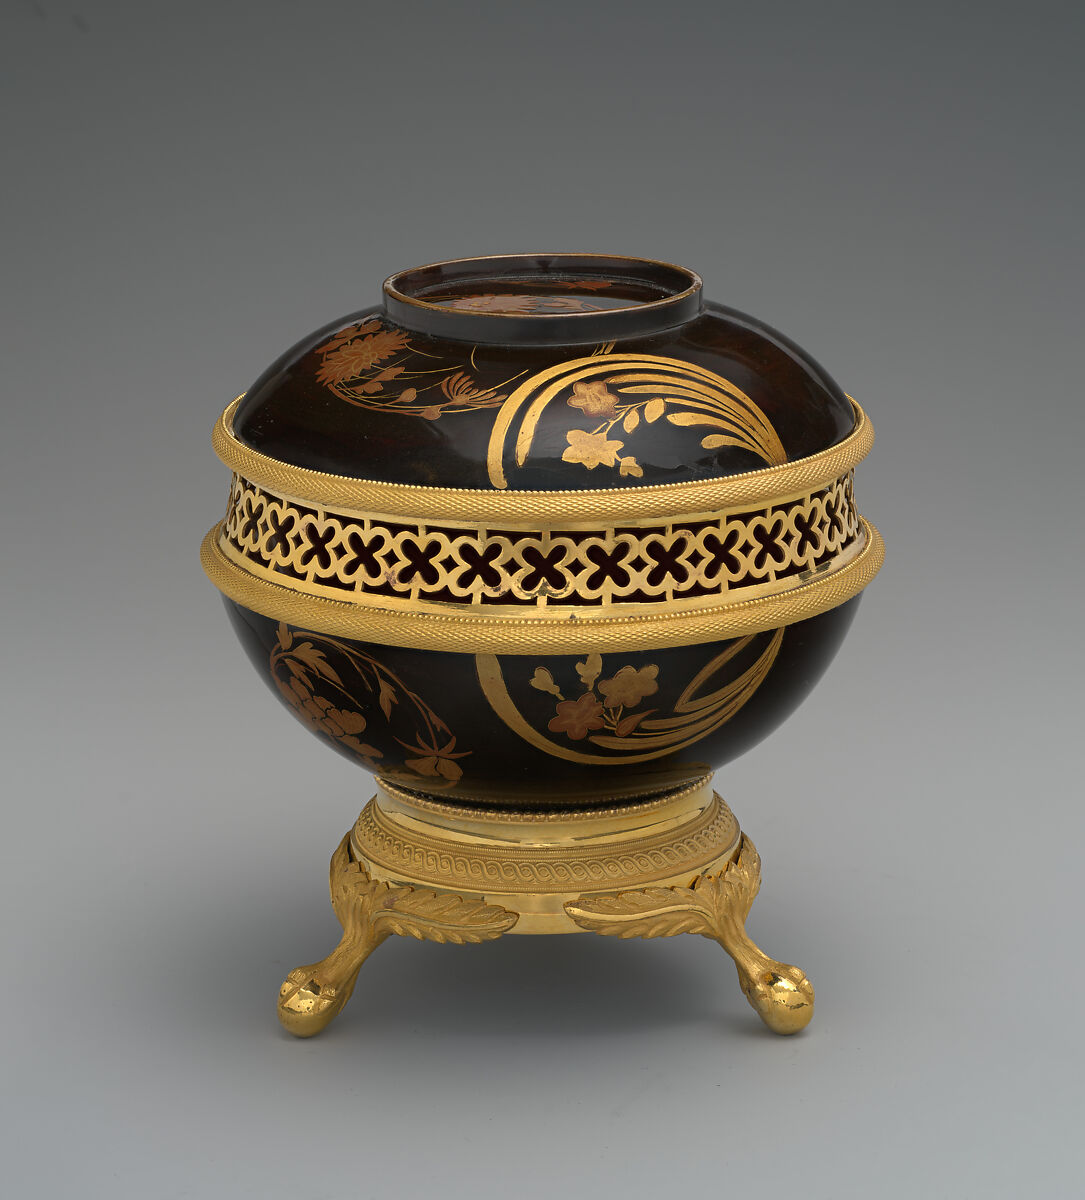 Potpourri vessel, attributed to Benjamin Vulliamy (British, 1747–1811), Japanese lacquered wood, gilded-bronze mounts, Japanese and British 